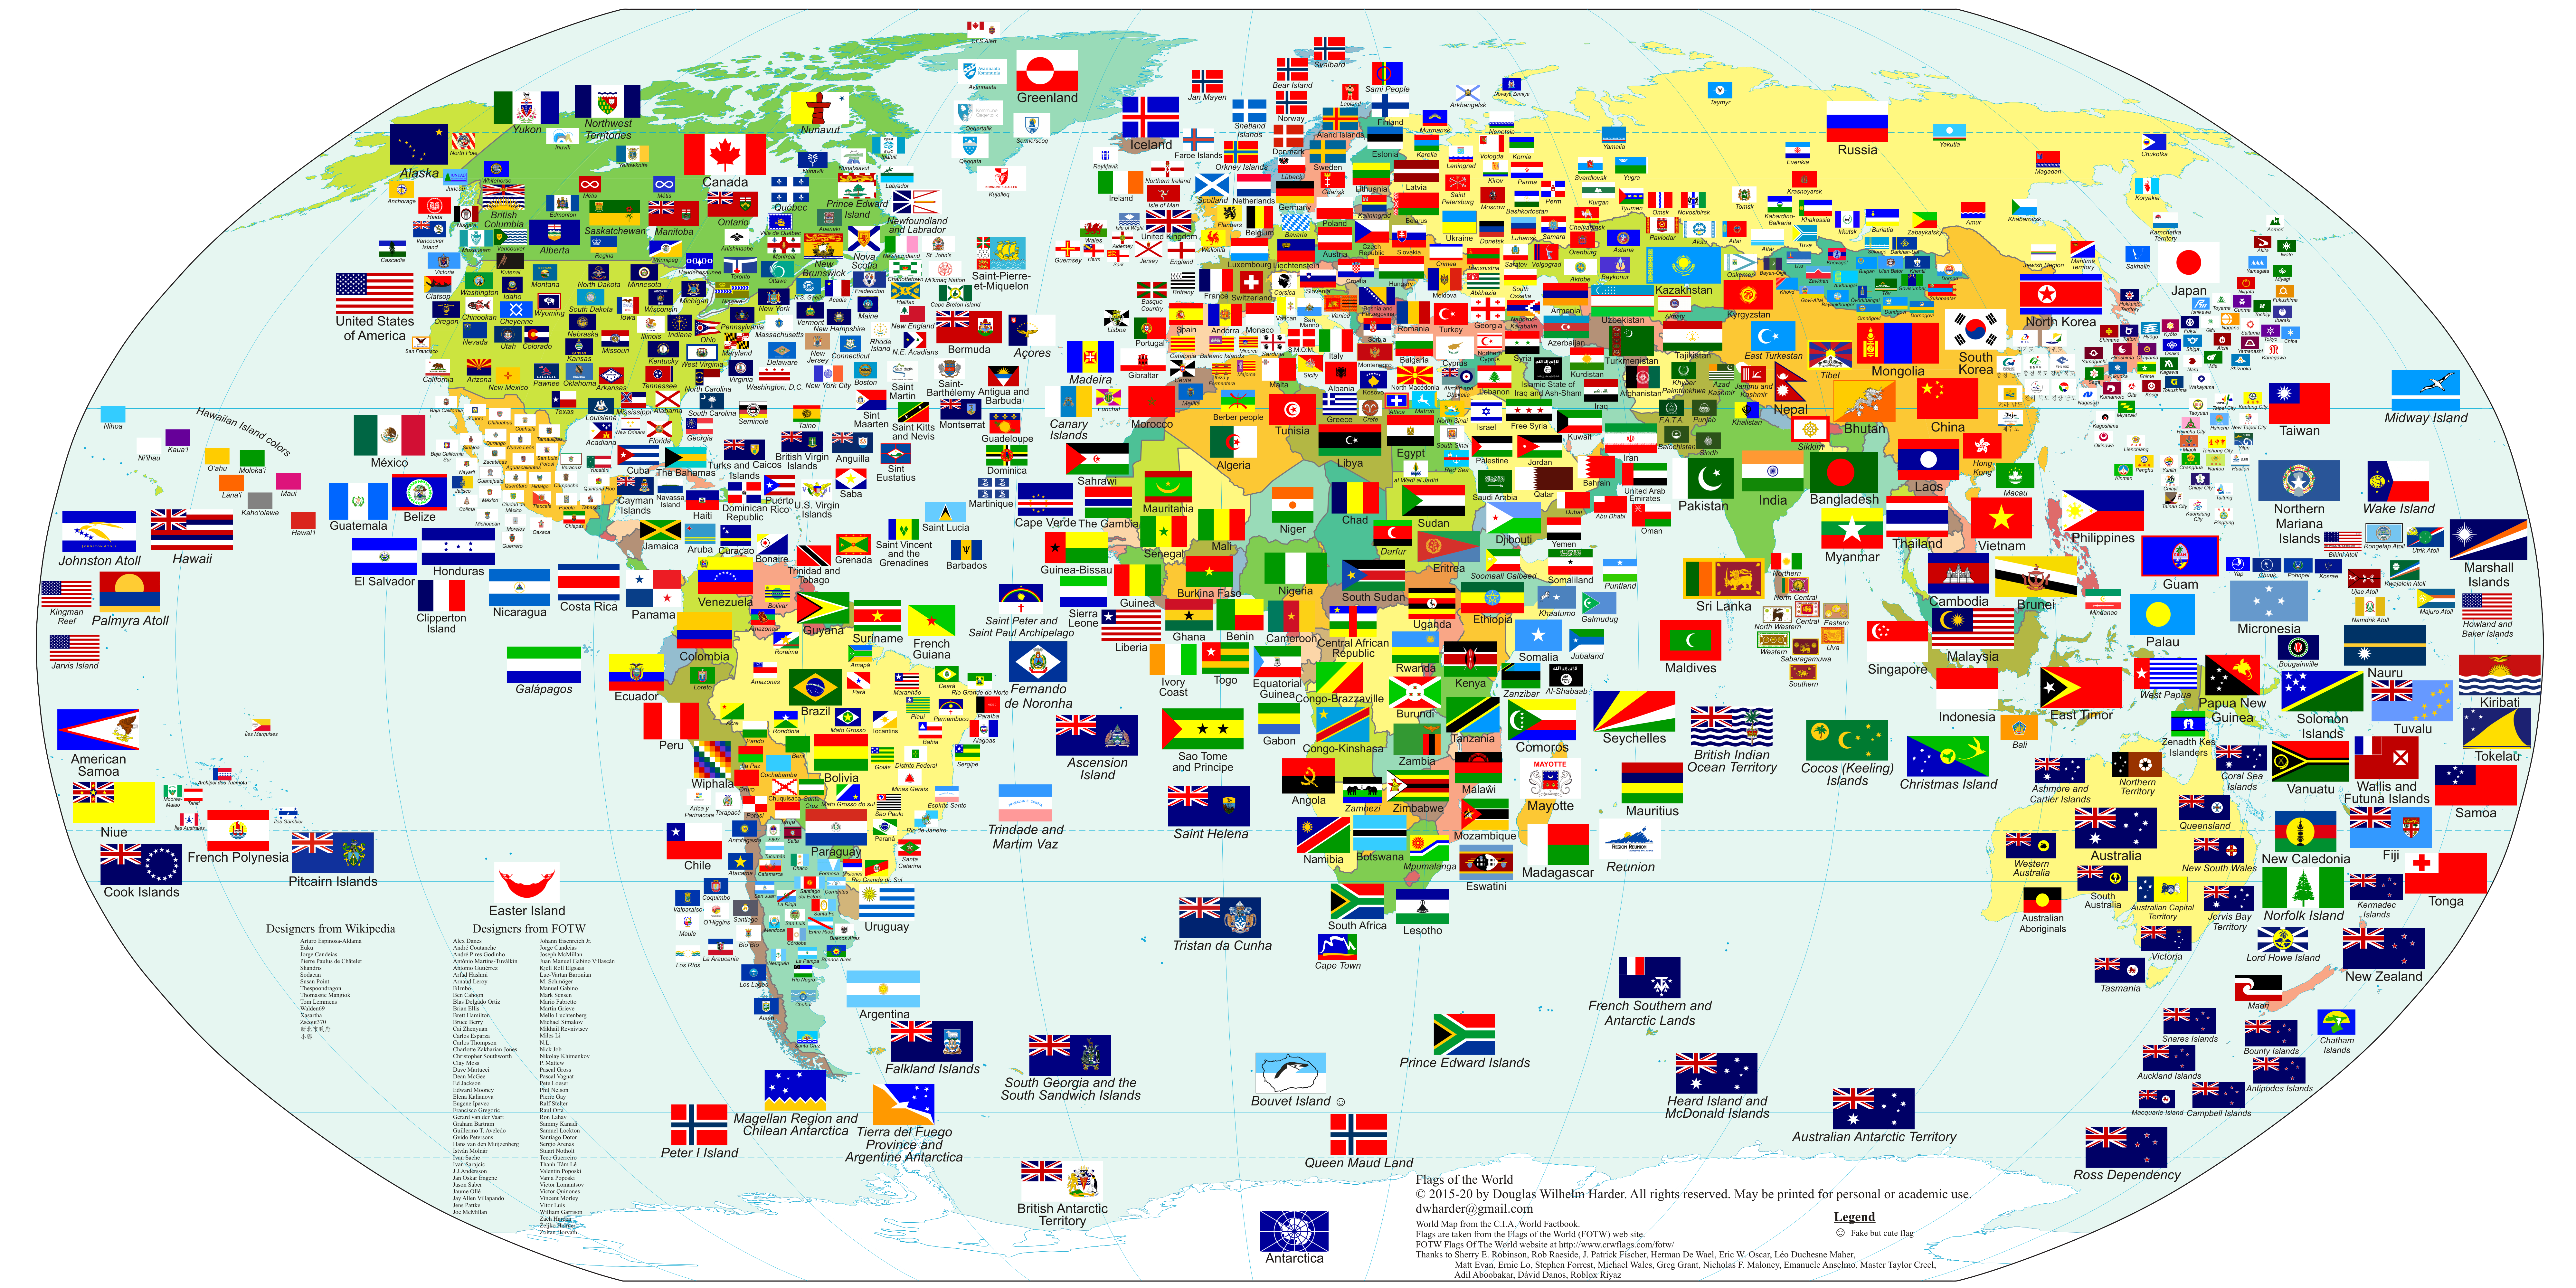 flags of the world labeled